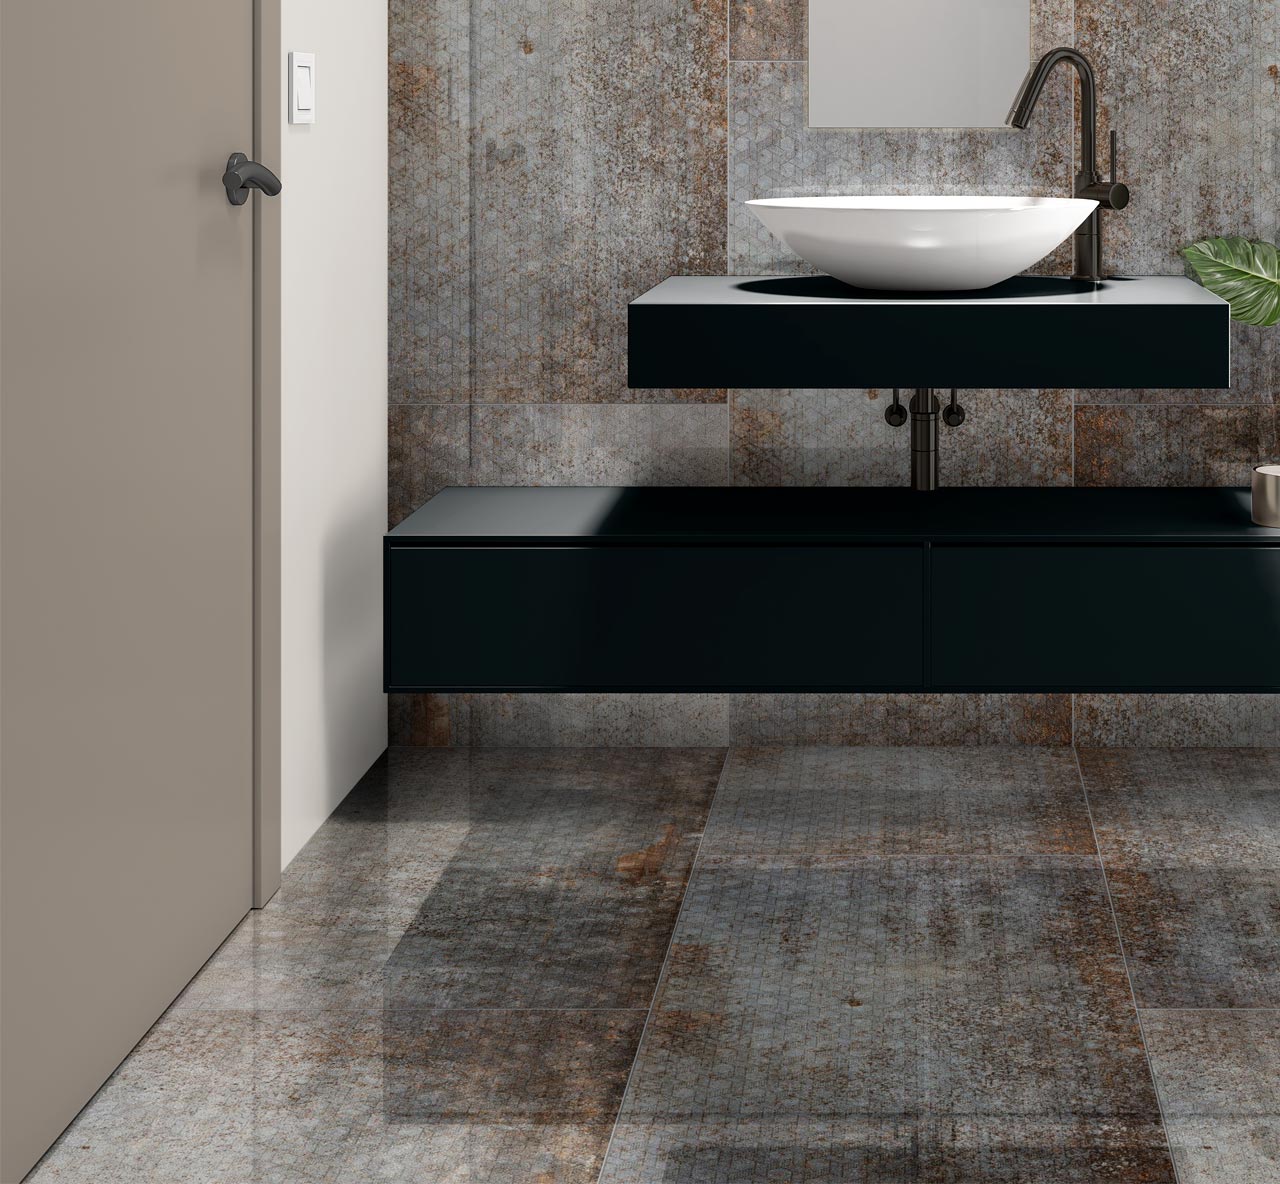 Evoque Grey Gloss Metal Effect Décor Tile used as polished bathroom floor tiles in a small urban industrial styled bathroom